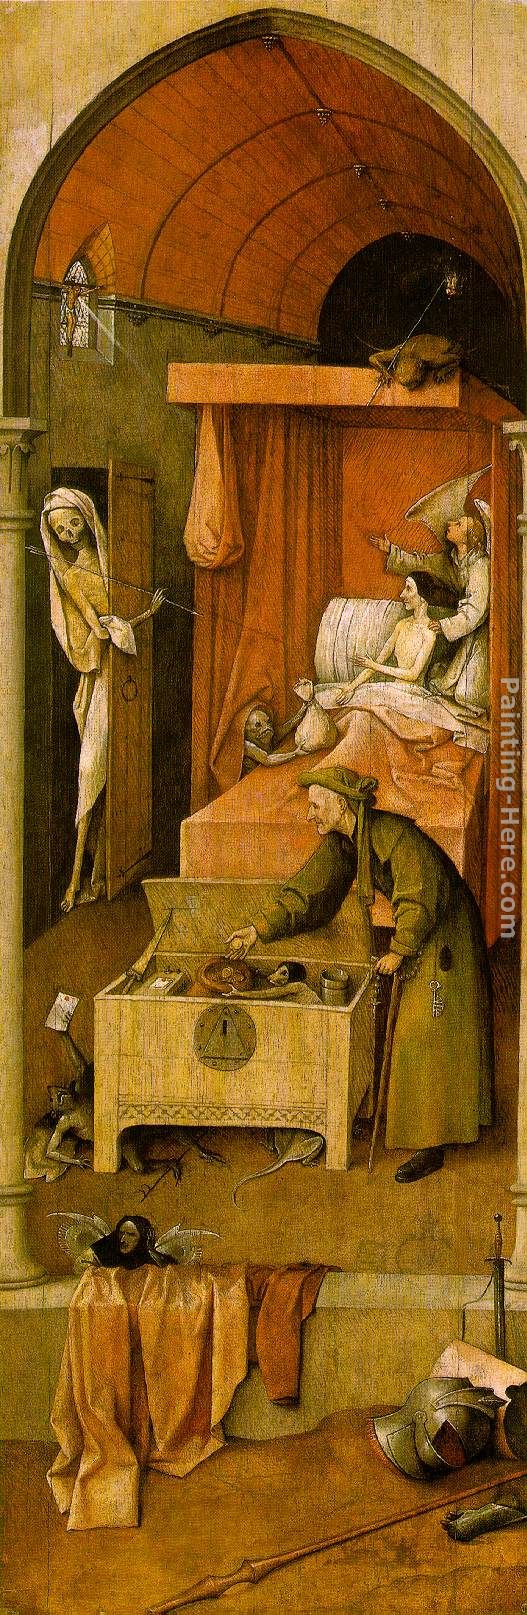 Death and the Miser painting - Hieronymus Bosch Death and the Miser art painting